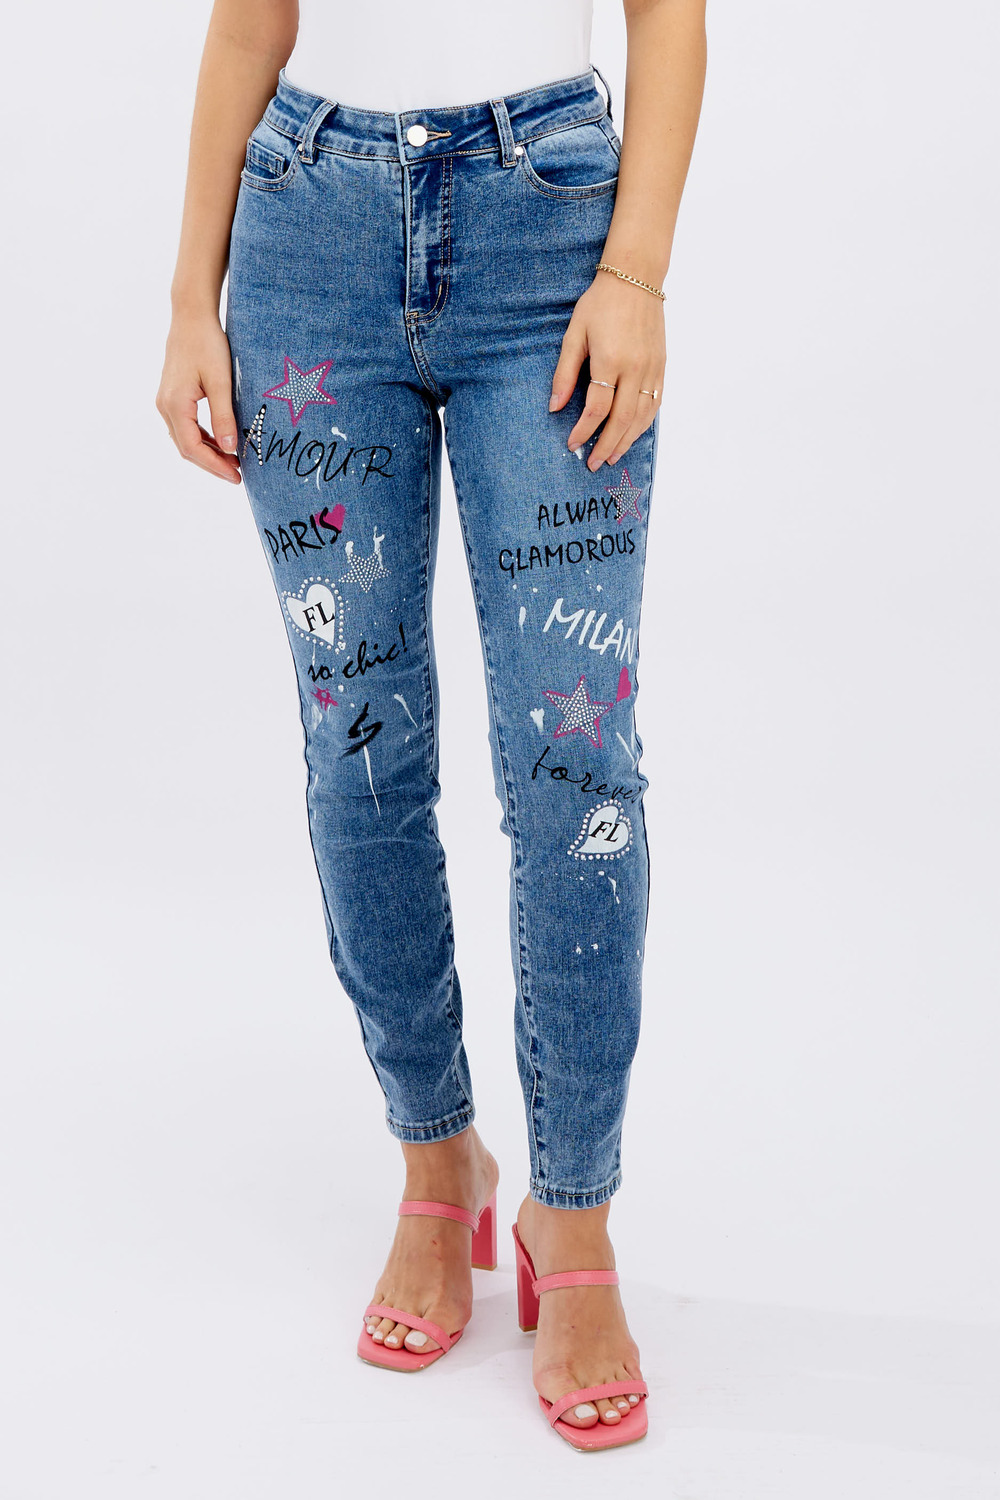 Graphic print jean style 246213 (blue)